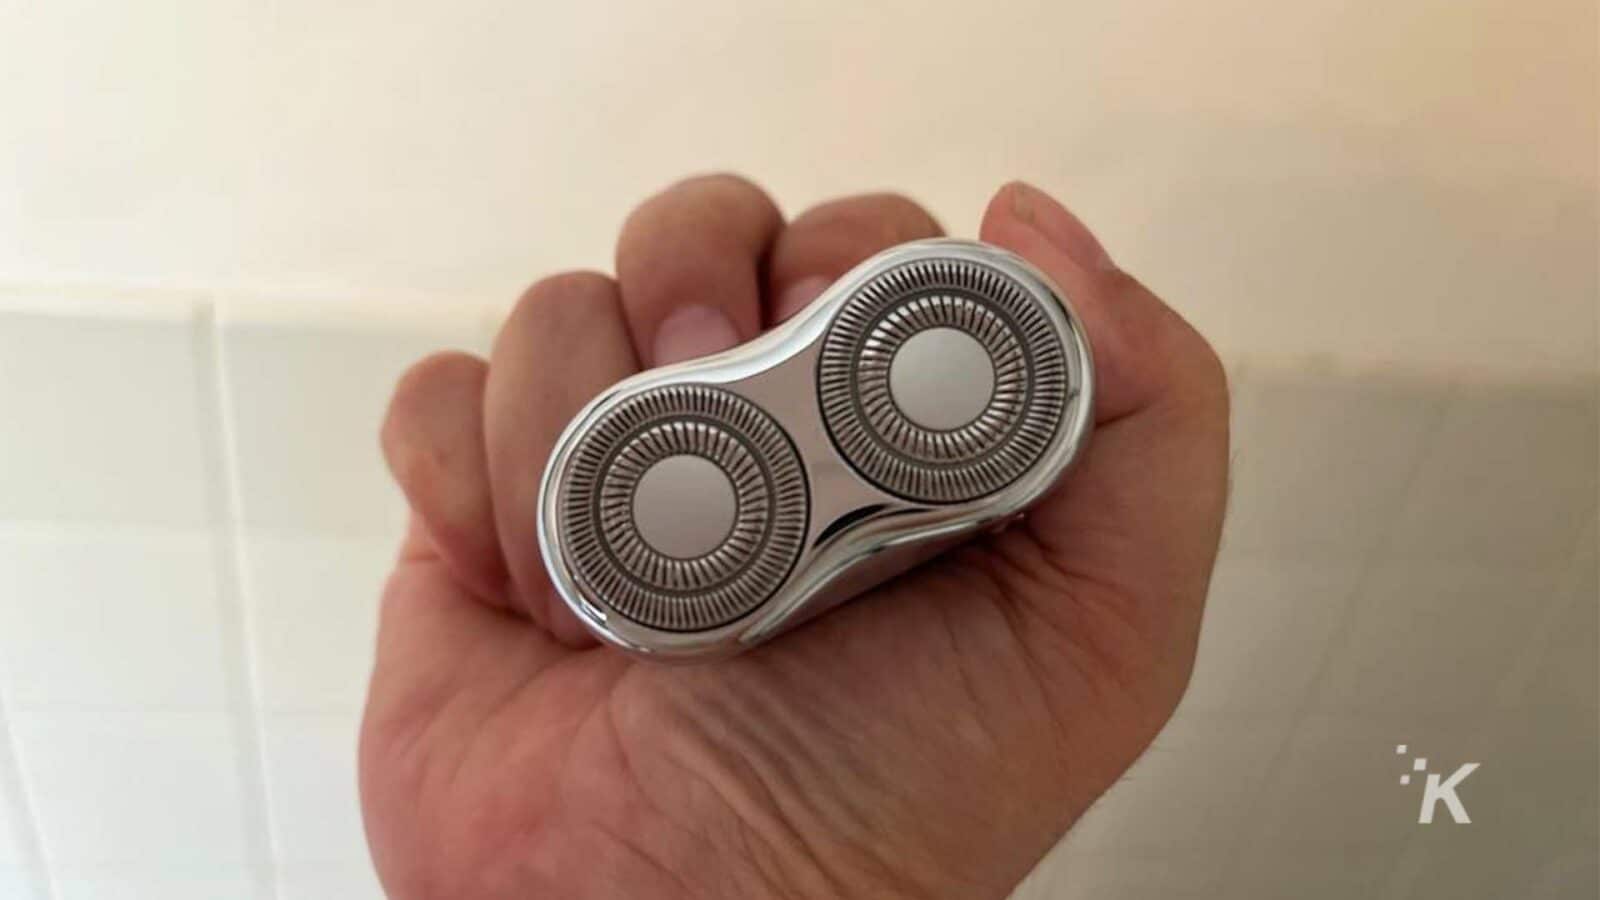 holding the yoose mini shaver in hand showing the blades